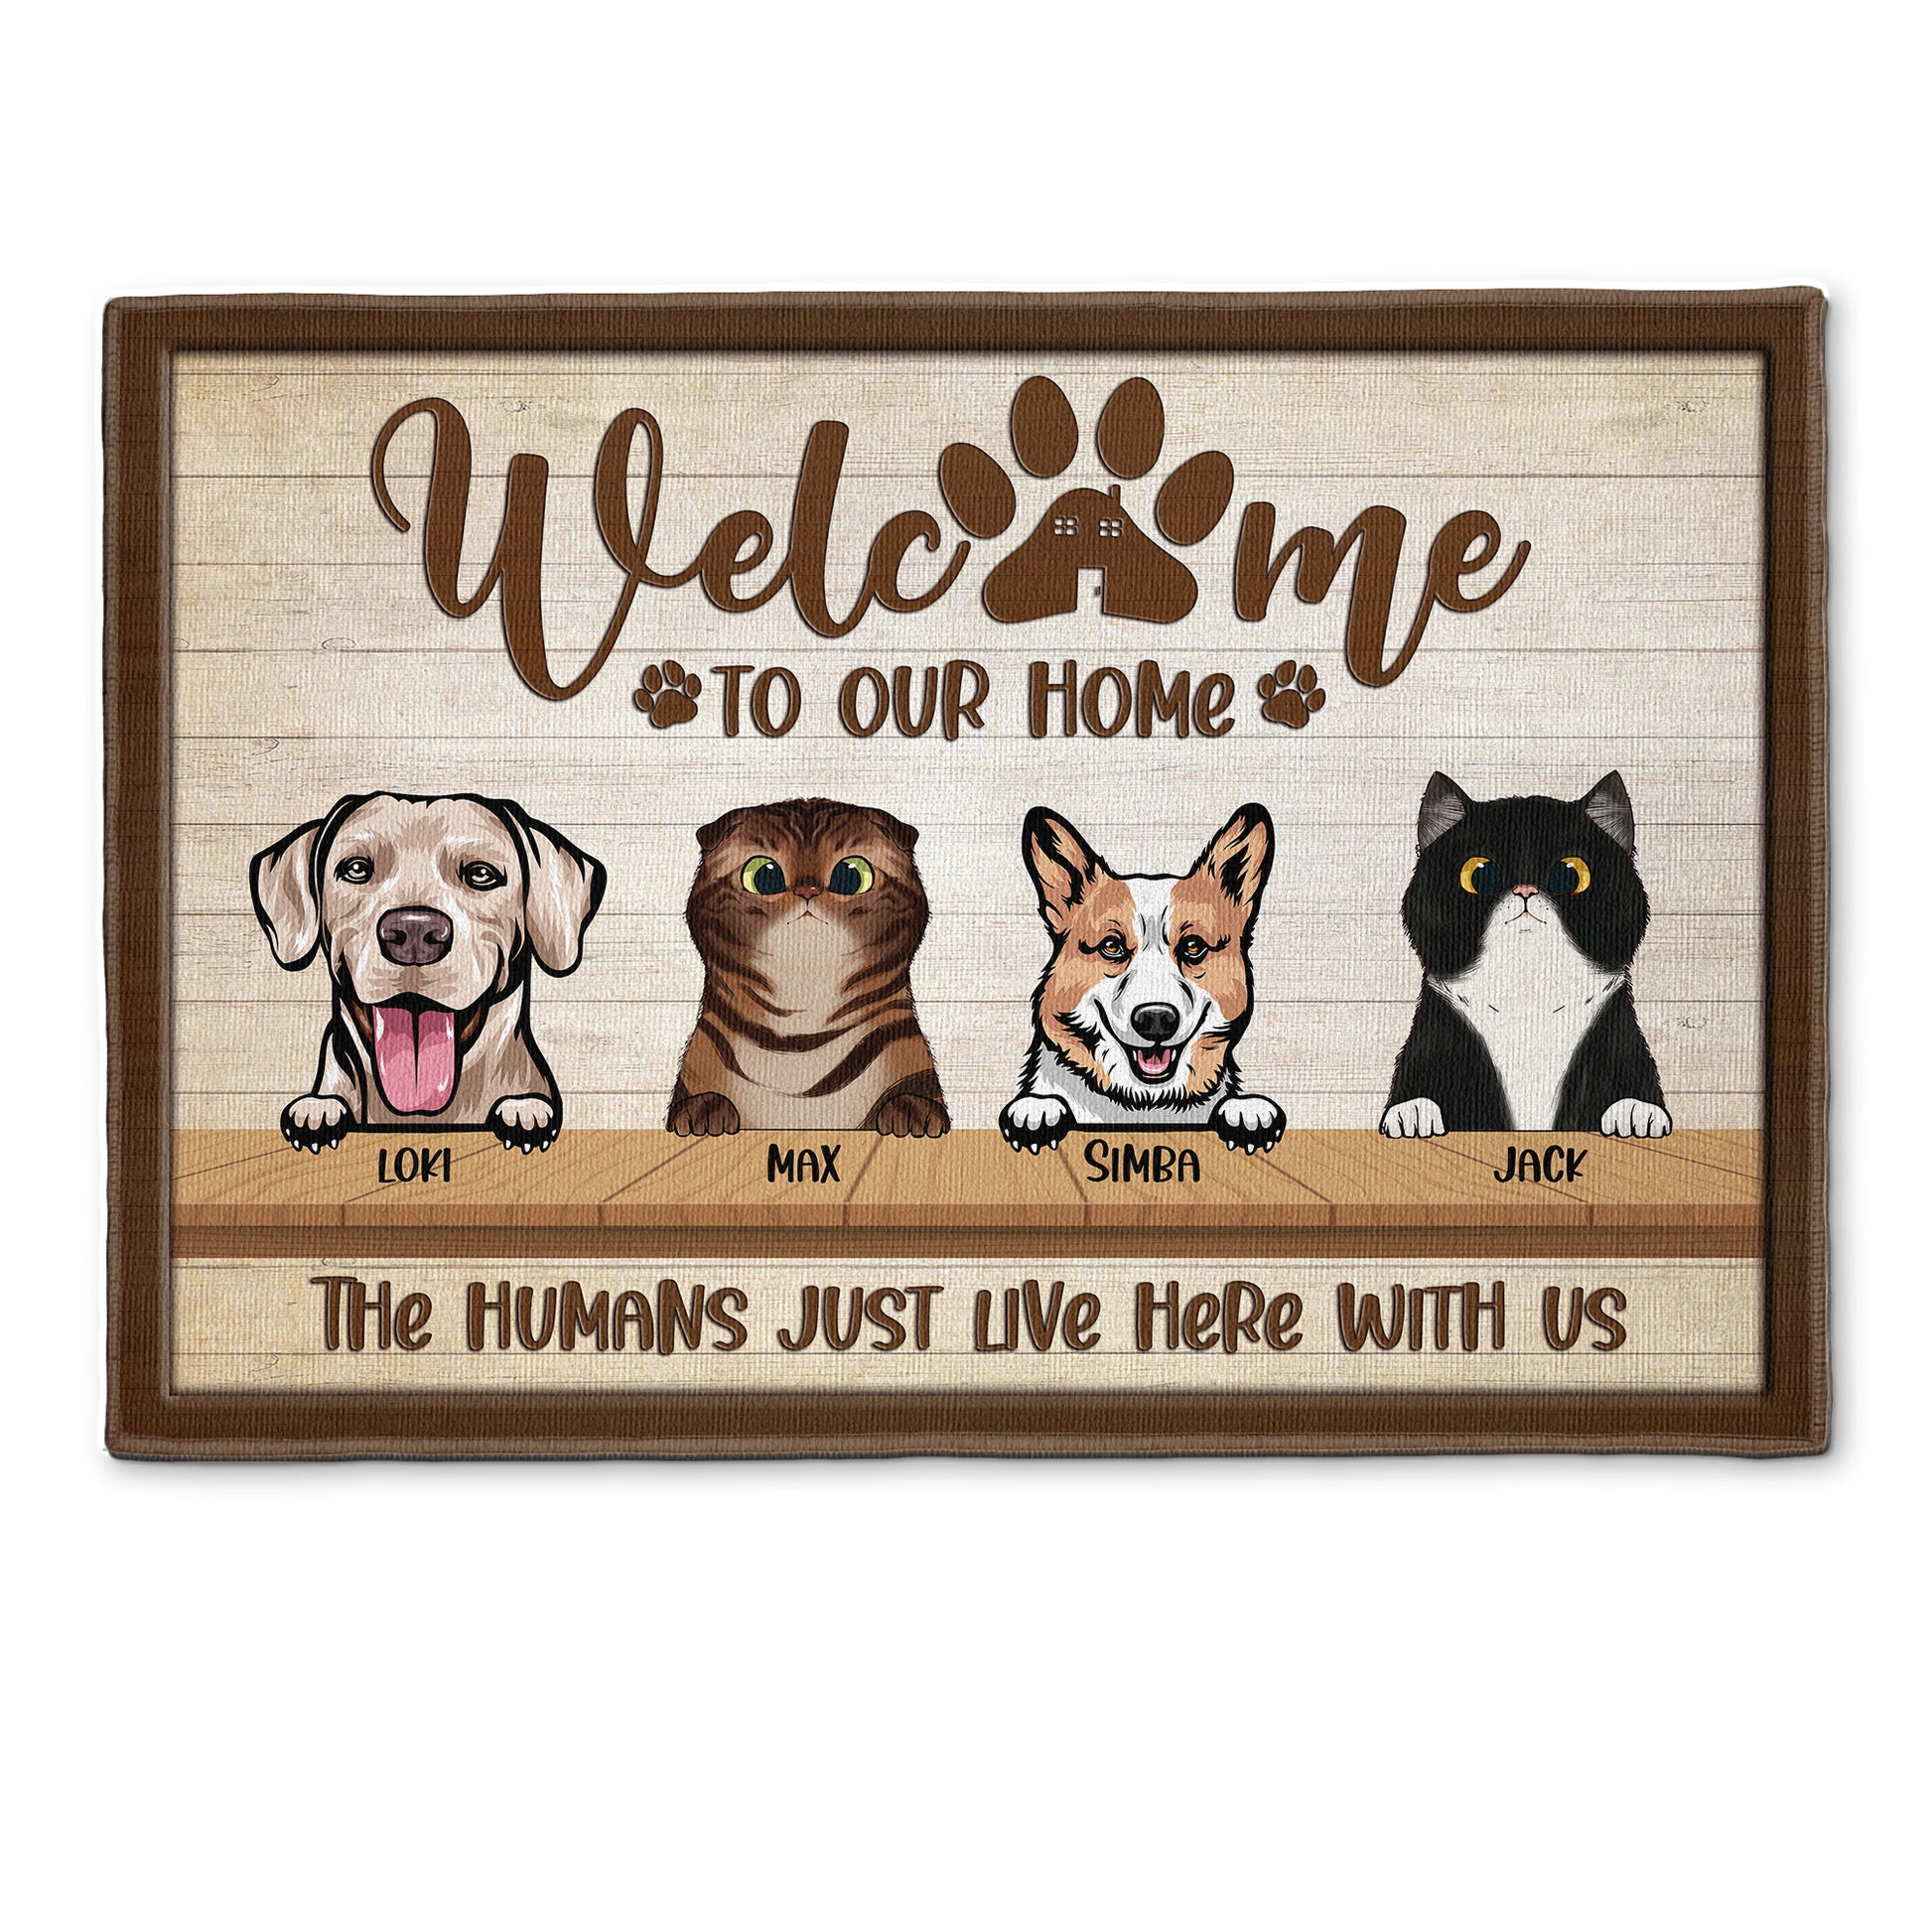 Dog and Cat Owner gifts for Women, Dog Cat Office Decor, Funny Desk Signs  for Dog, Cat or Pet Lovers, Dog Cat Lover gifts for Women Coworker Friend